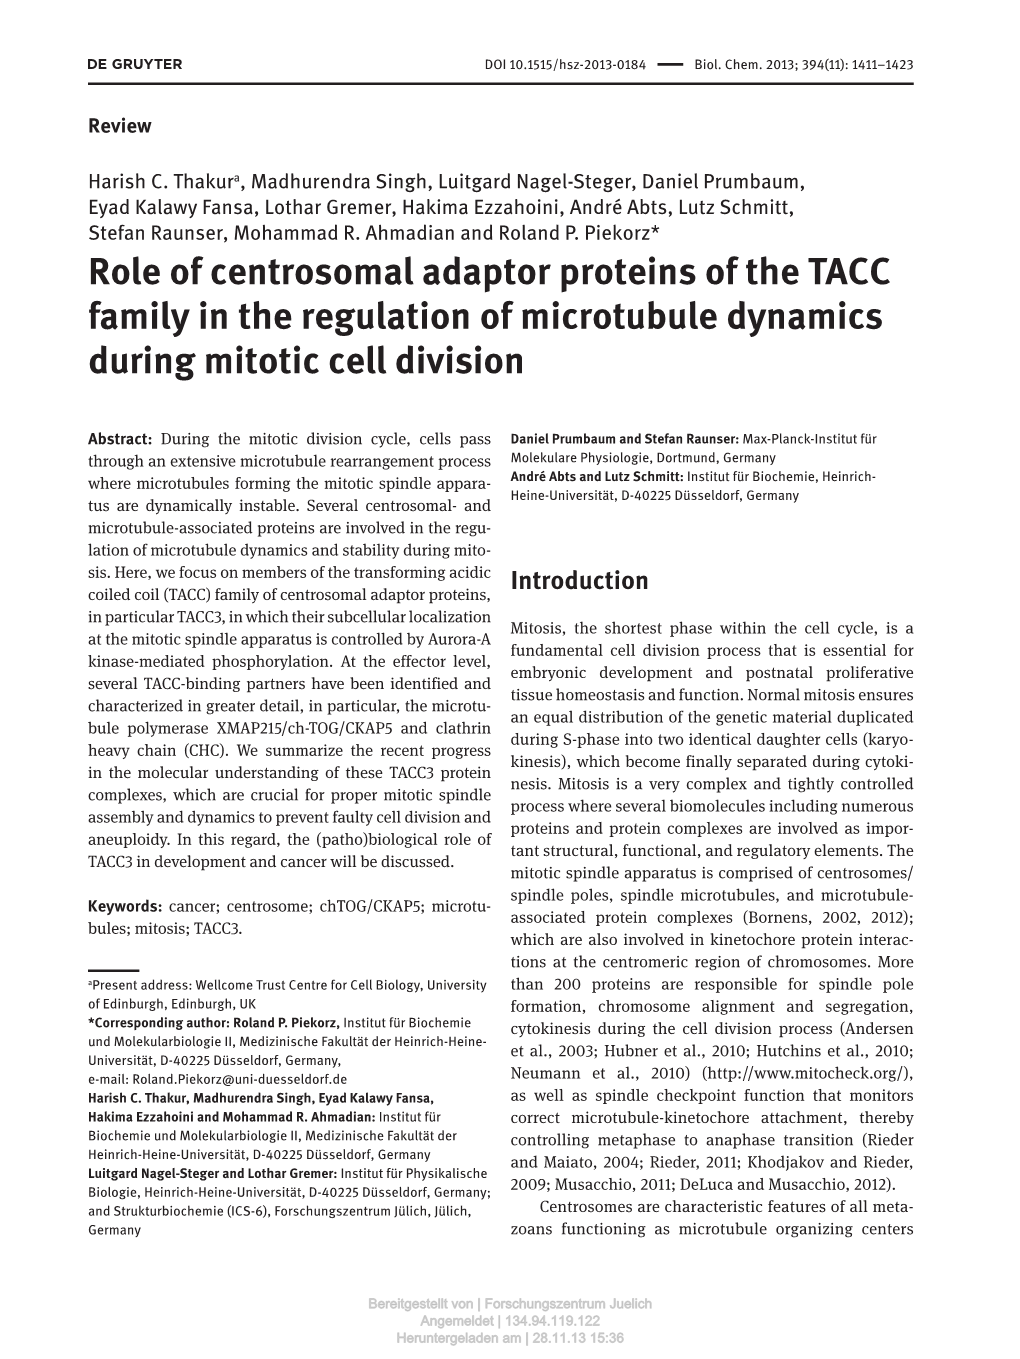 Role of Centrosomal Adaptor Proteins of the TACC Family in the Regulation of Microtubule Dynamics During Mitotic Cell Division